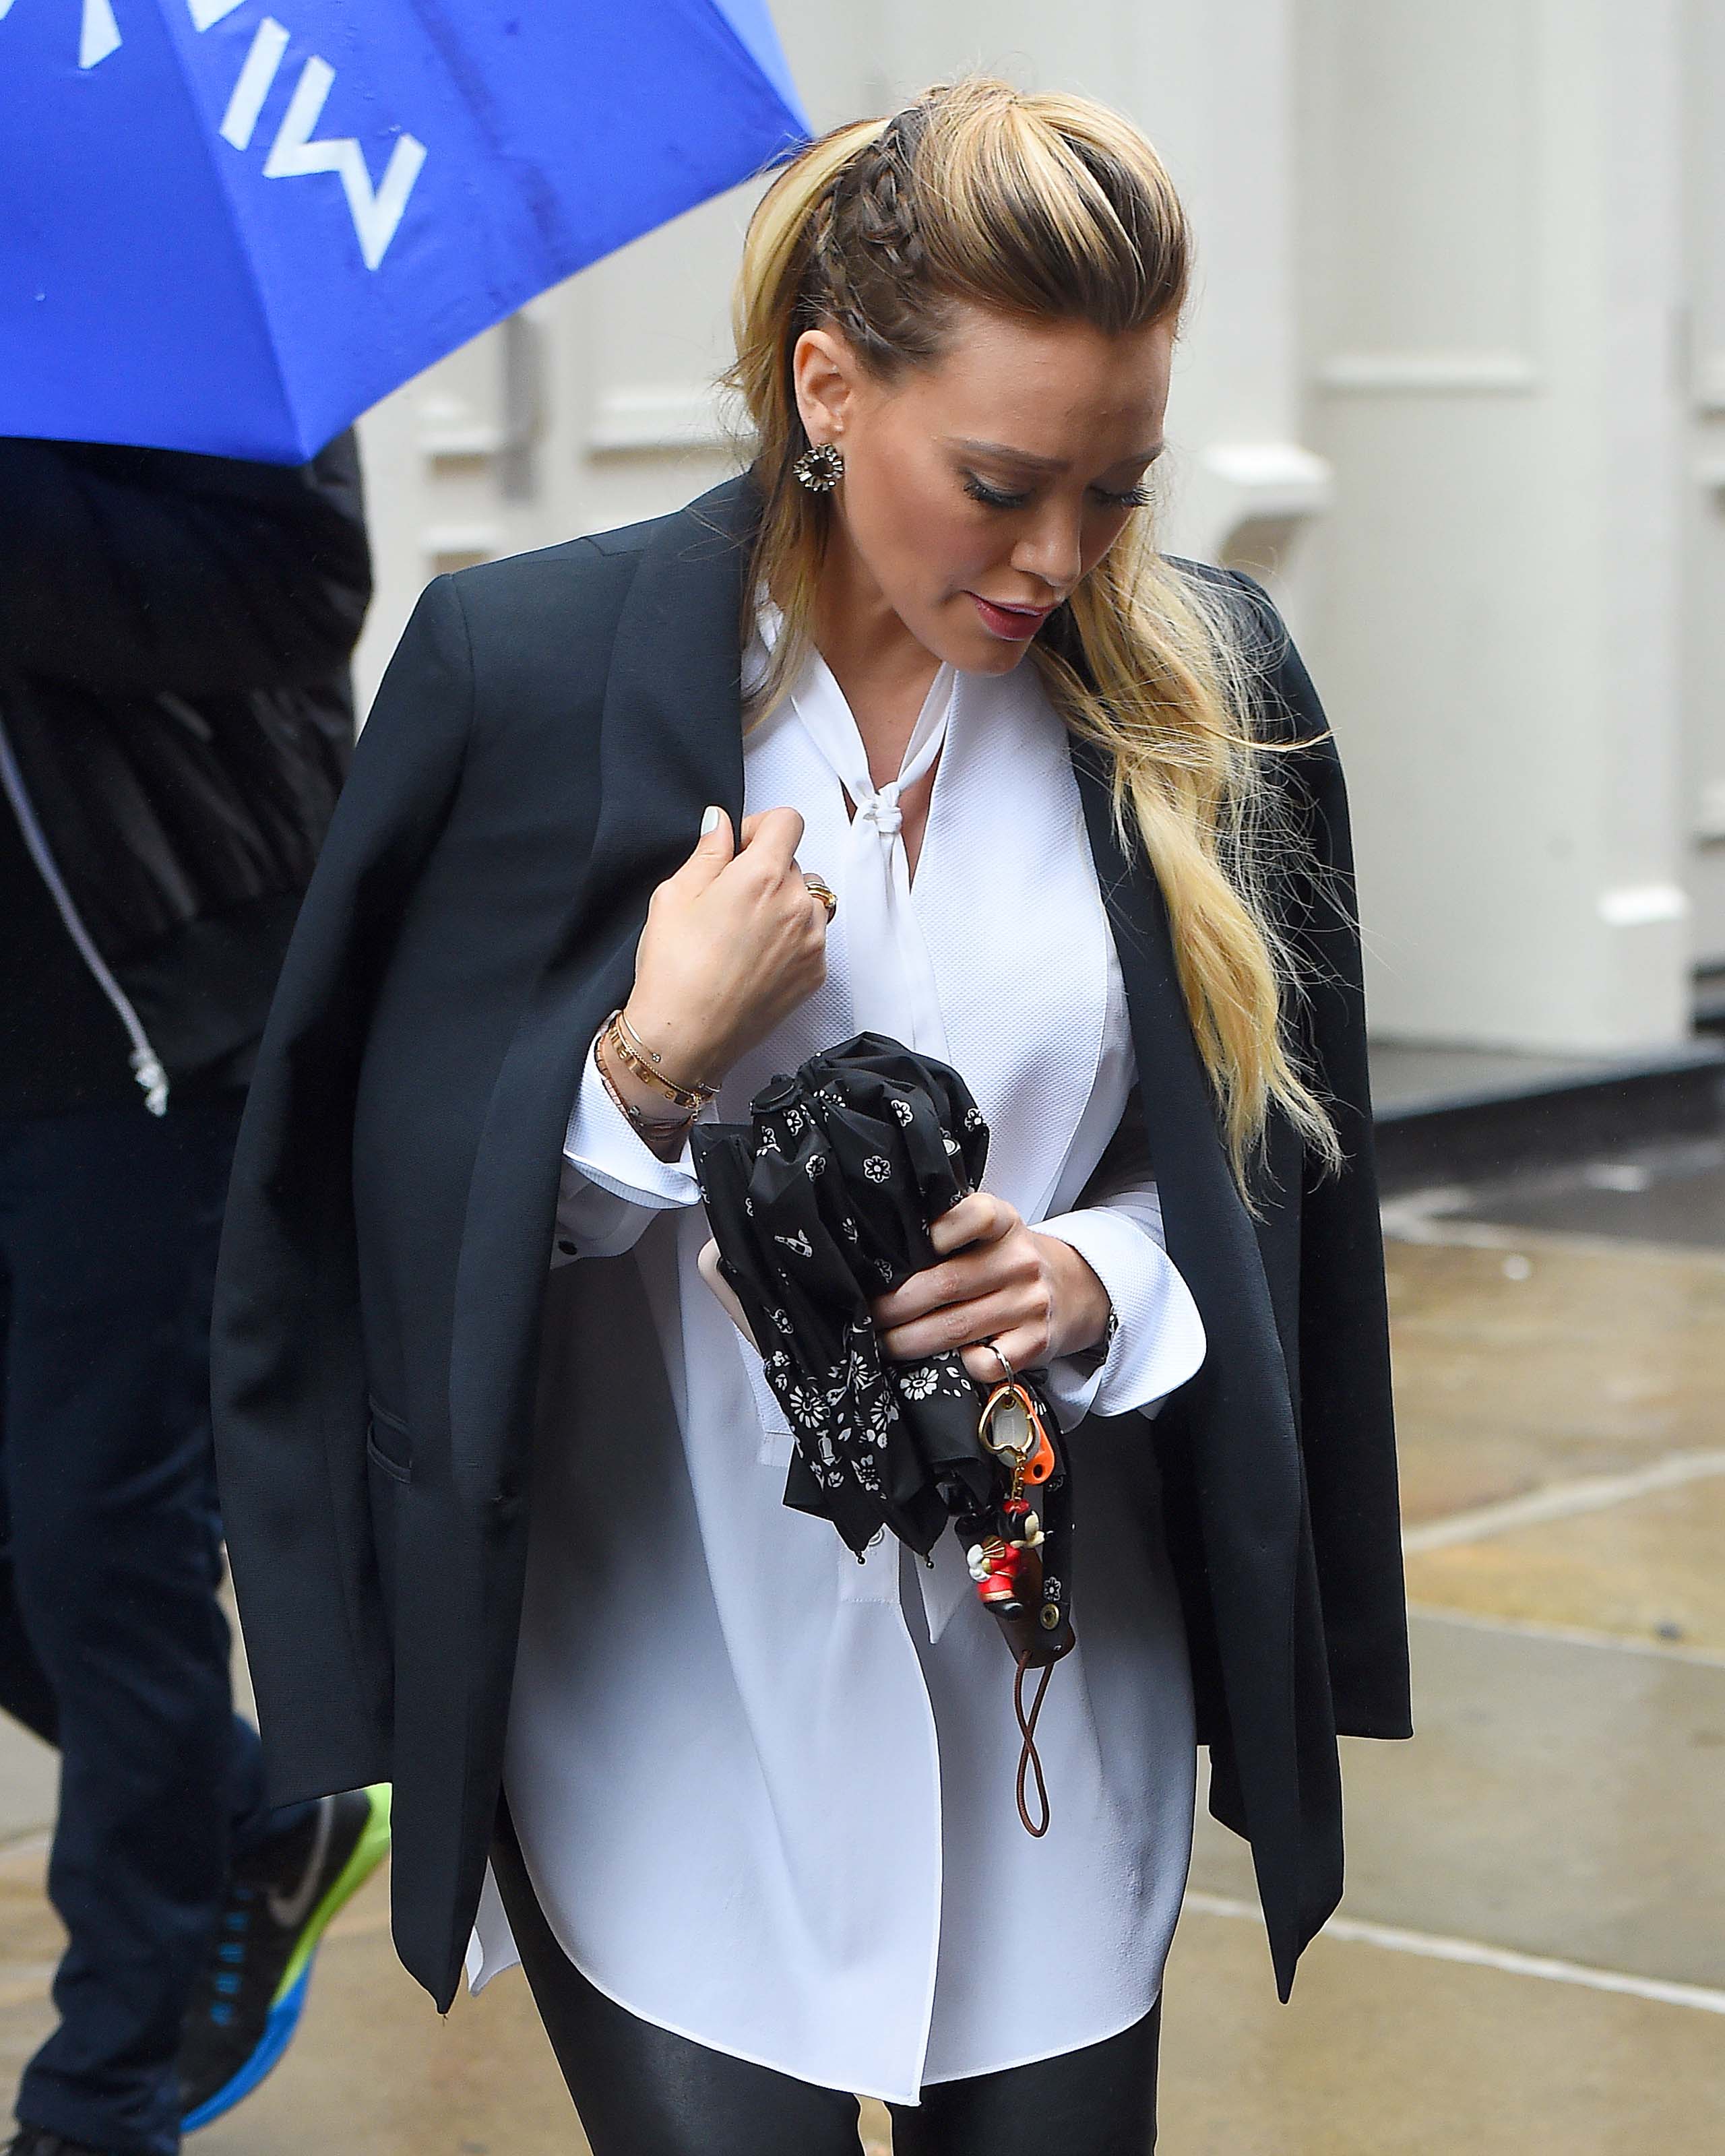 Hilary Duff out in NYC